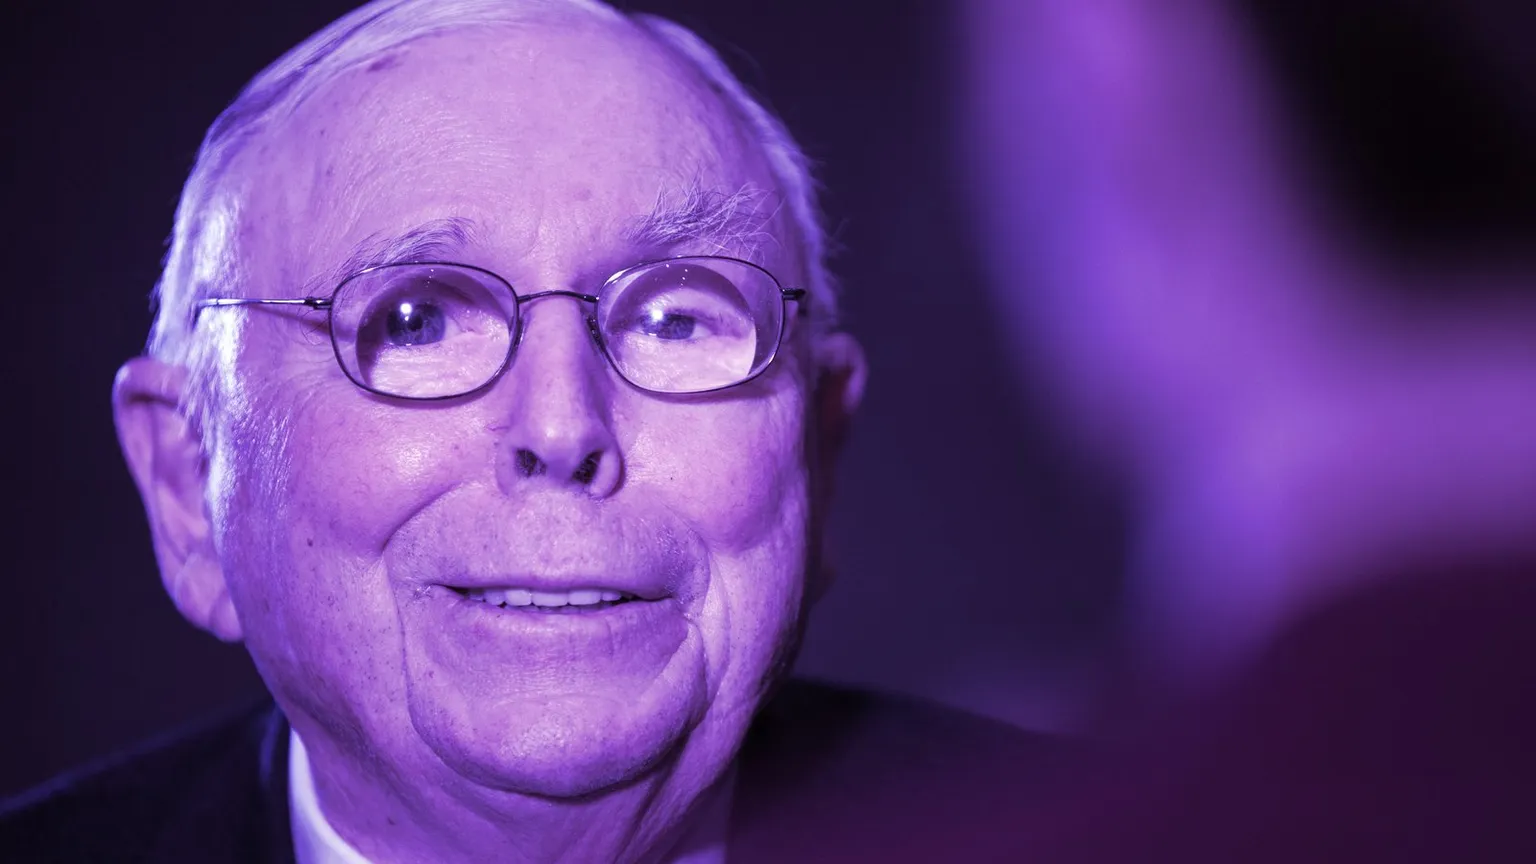 Charlie Munger is repulsed by your Bitcoin. Image: Shutterstock